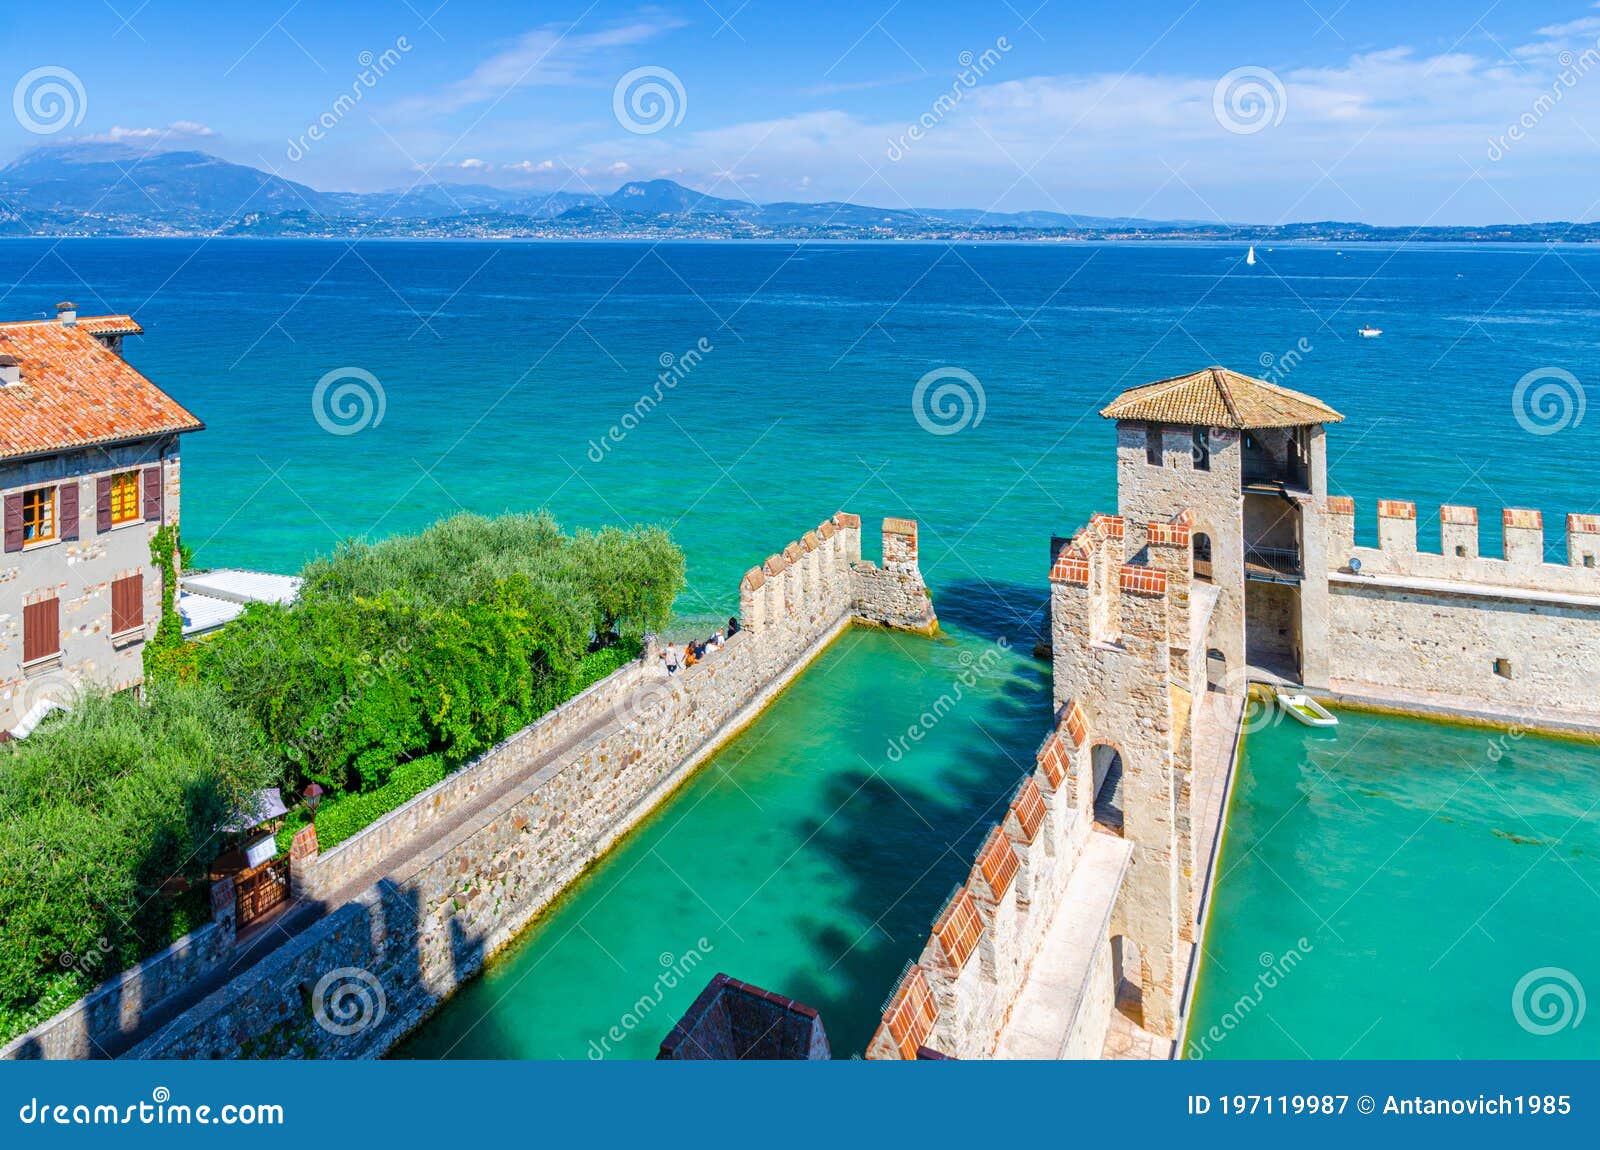 Small Fortified Harbor with Turquoise Water, Scaligero Castle Castello ...